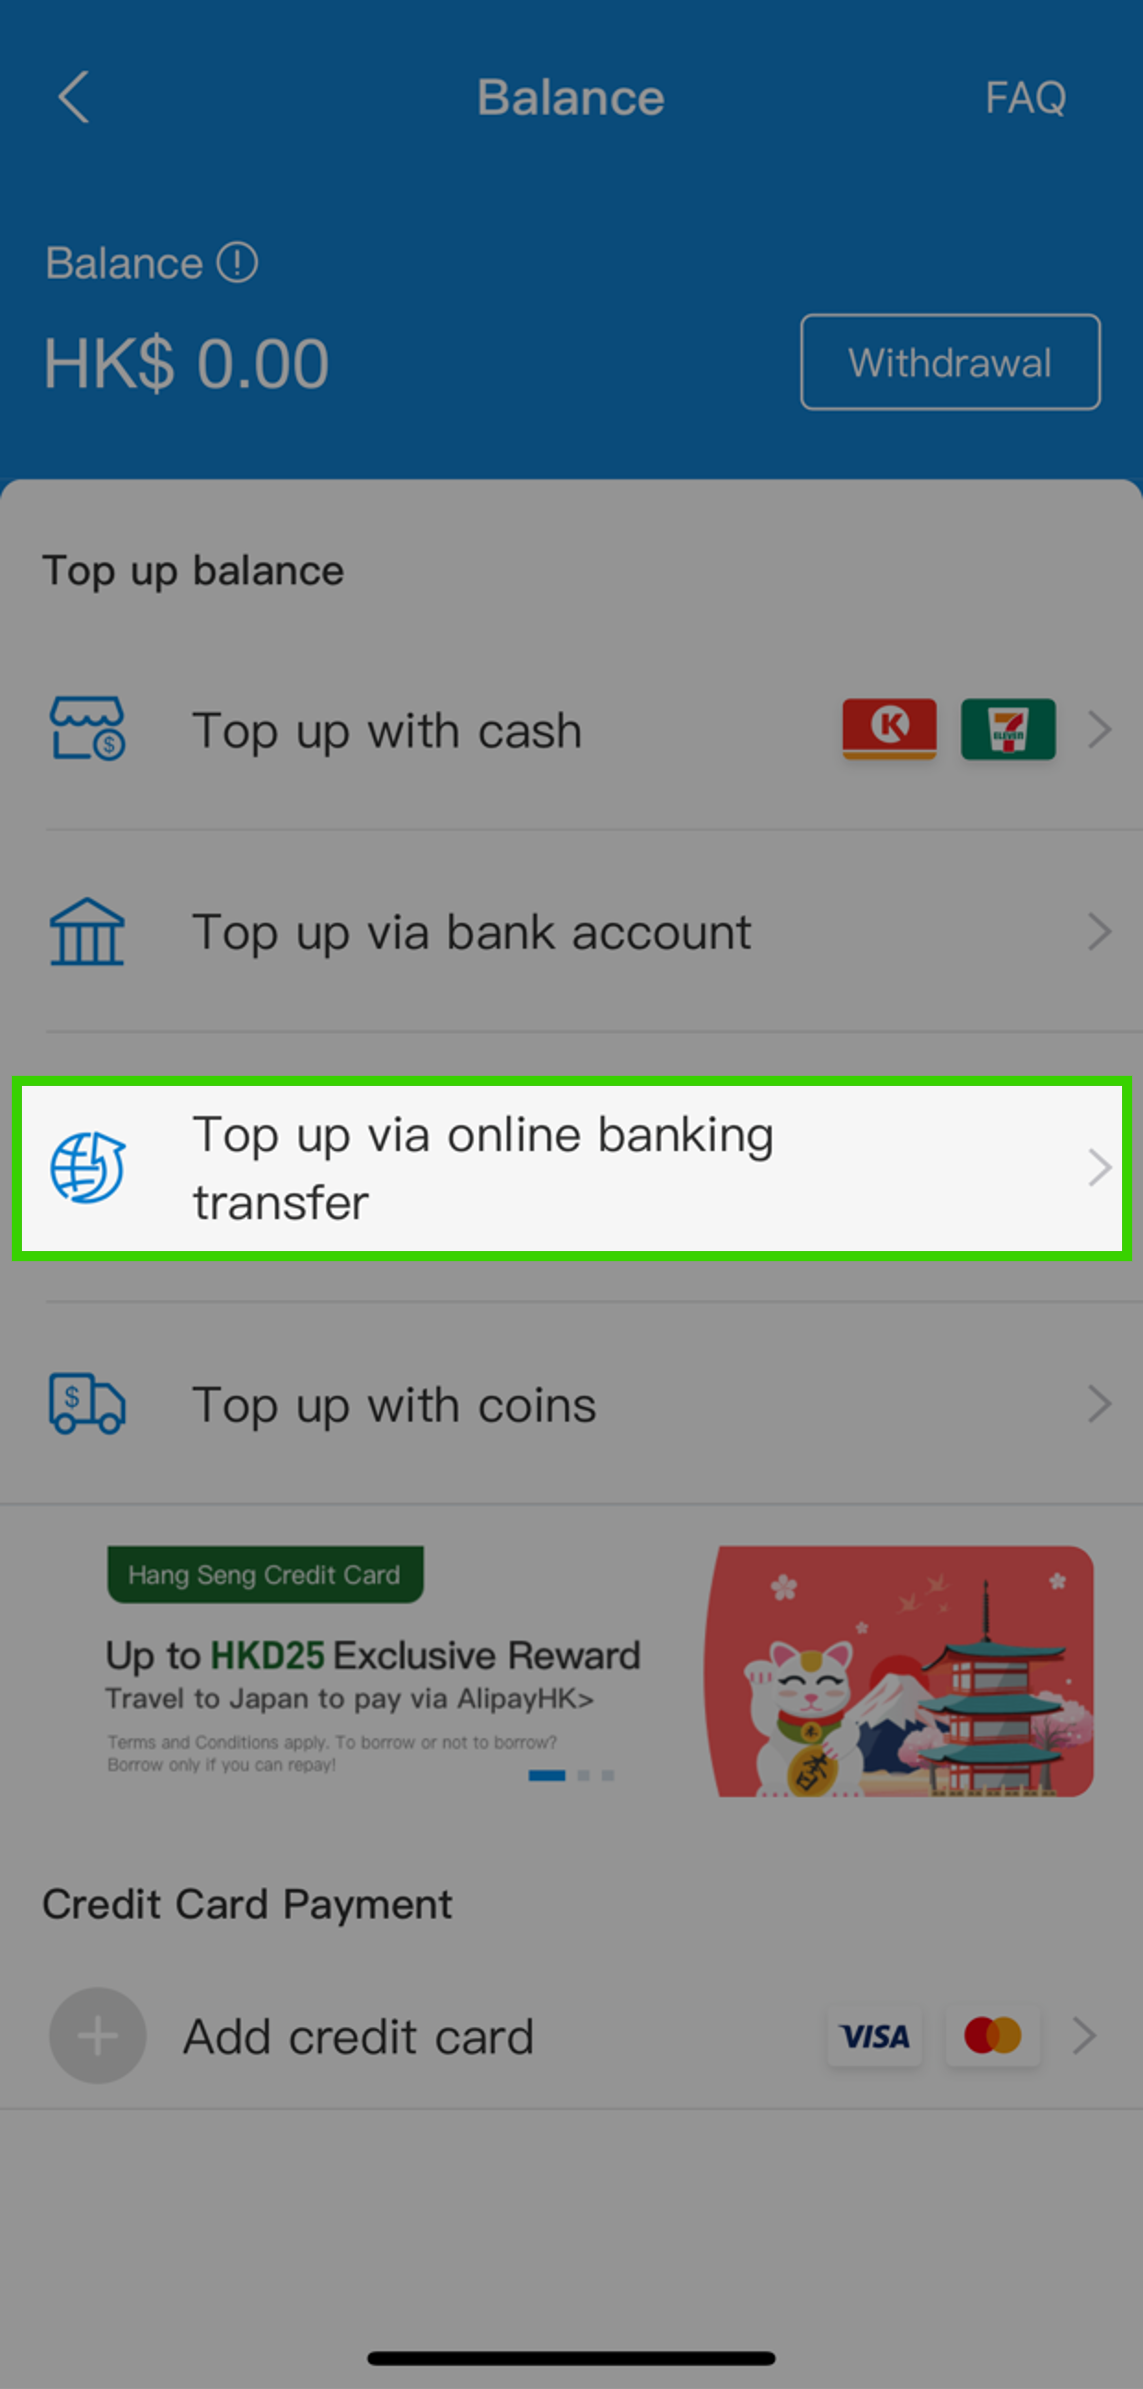 Select ‘Top up via online banking transfer’